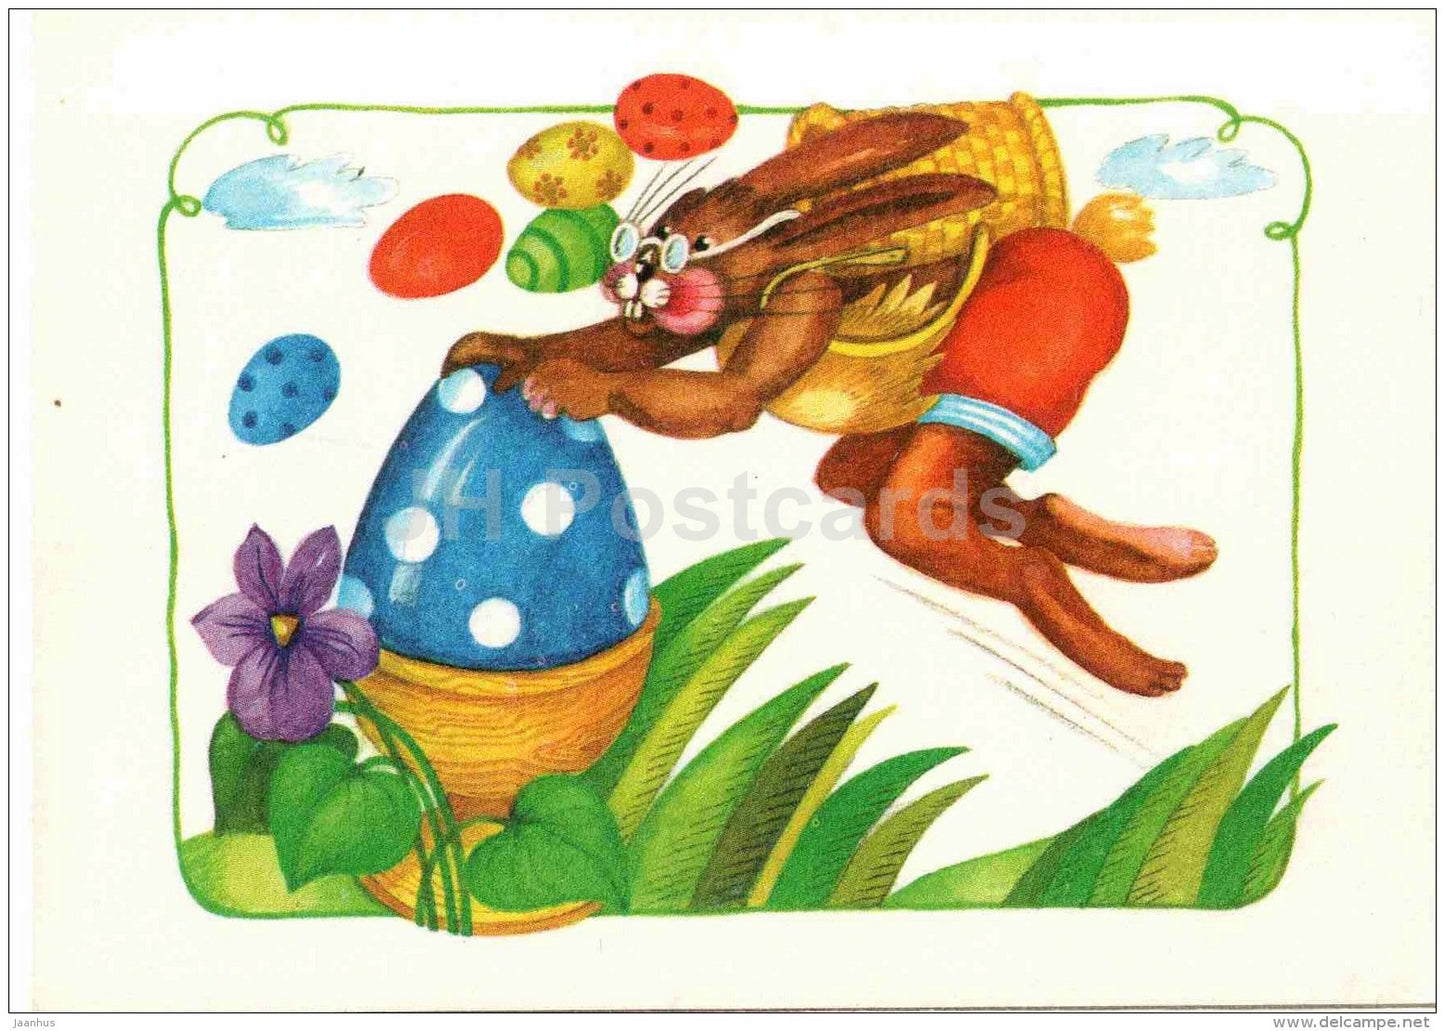 Easter Greeting Card - Ostern - illustration by M. Stolarow - hare - eggs - Germany - unused - JH Postcards